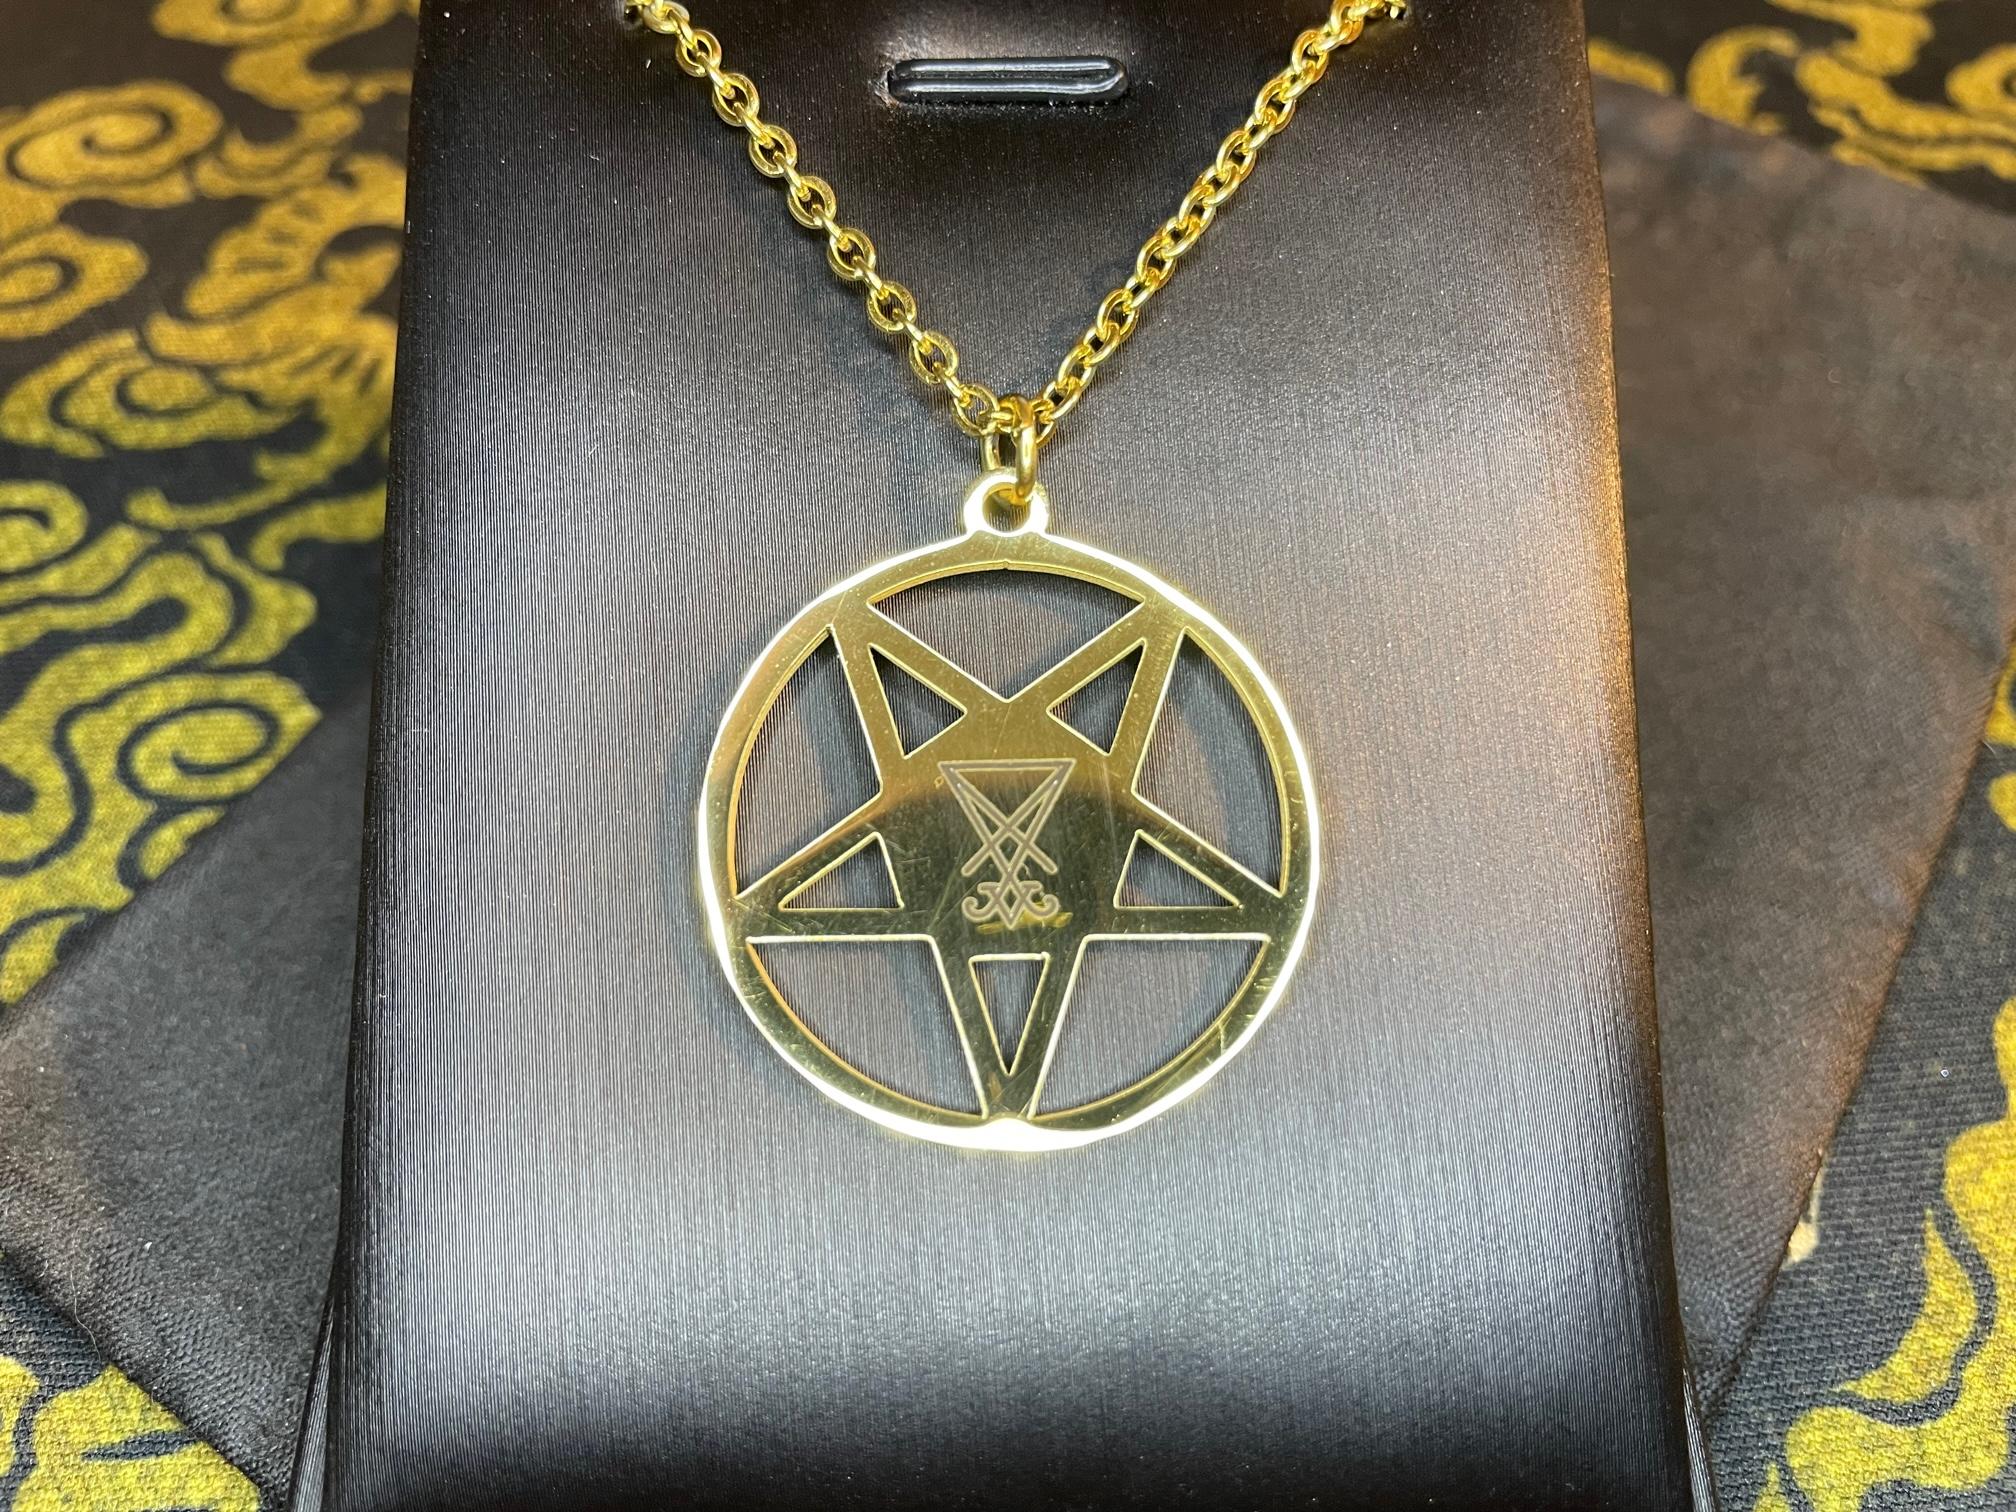 Inverted Pentagram Sigil of Lucifer Upside Down Stainless Steel Pendant Necklace Satanic Gothic Pagan Wiccan Druid Darkness Jewelry Gold